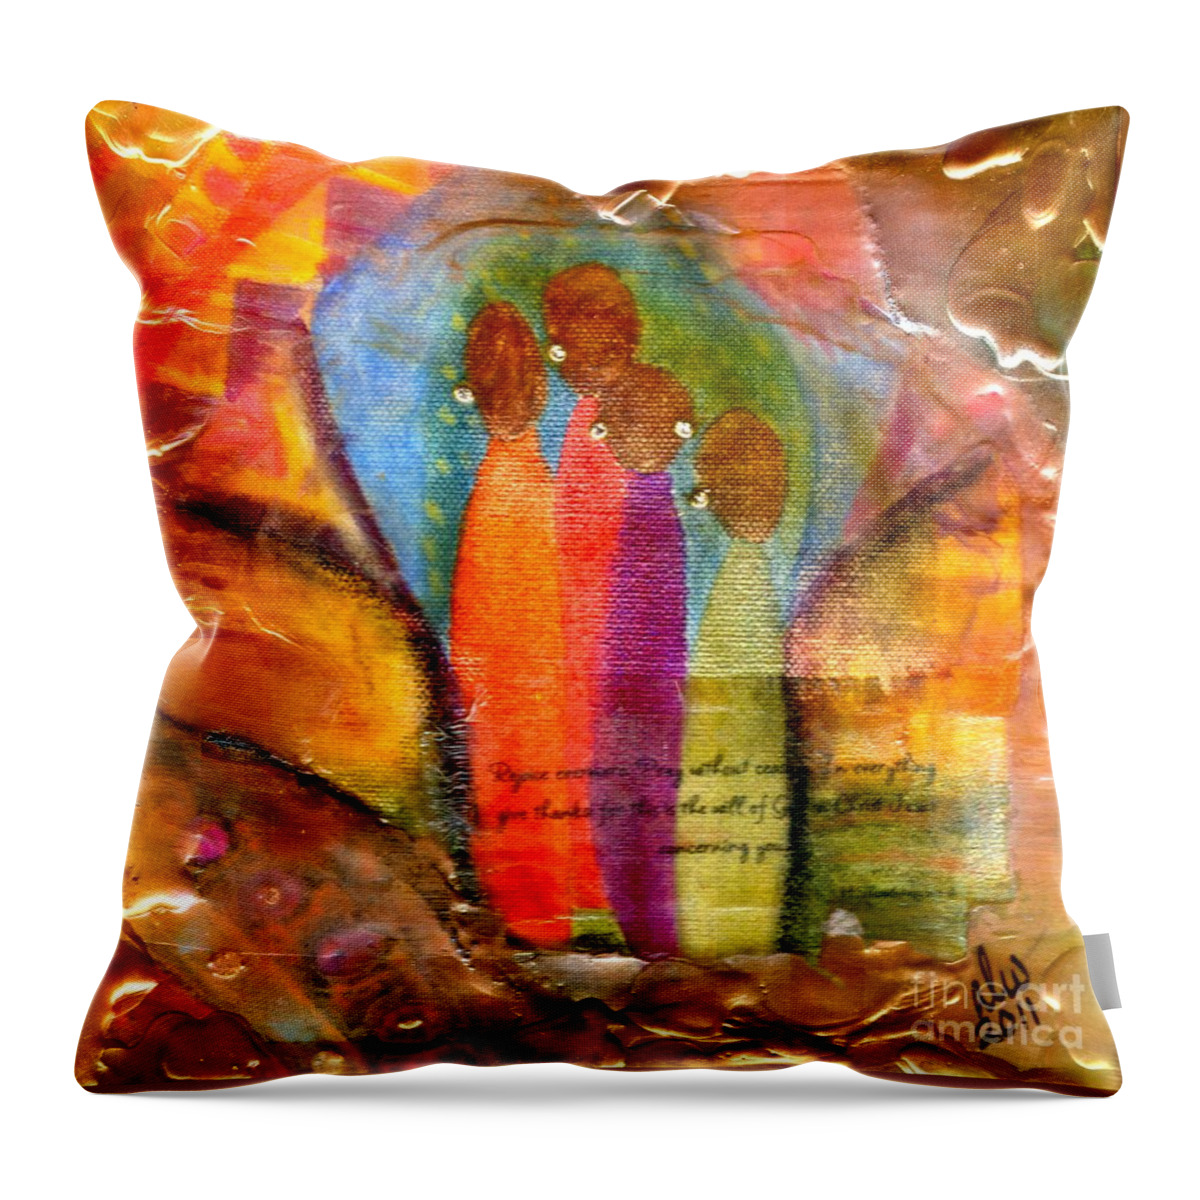 Wood Throw Pillow featuring the mixed media Rejoice by Angela L Walker